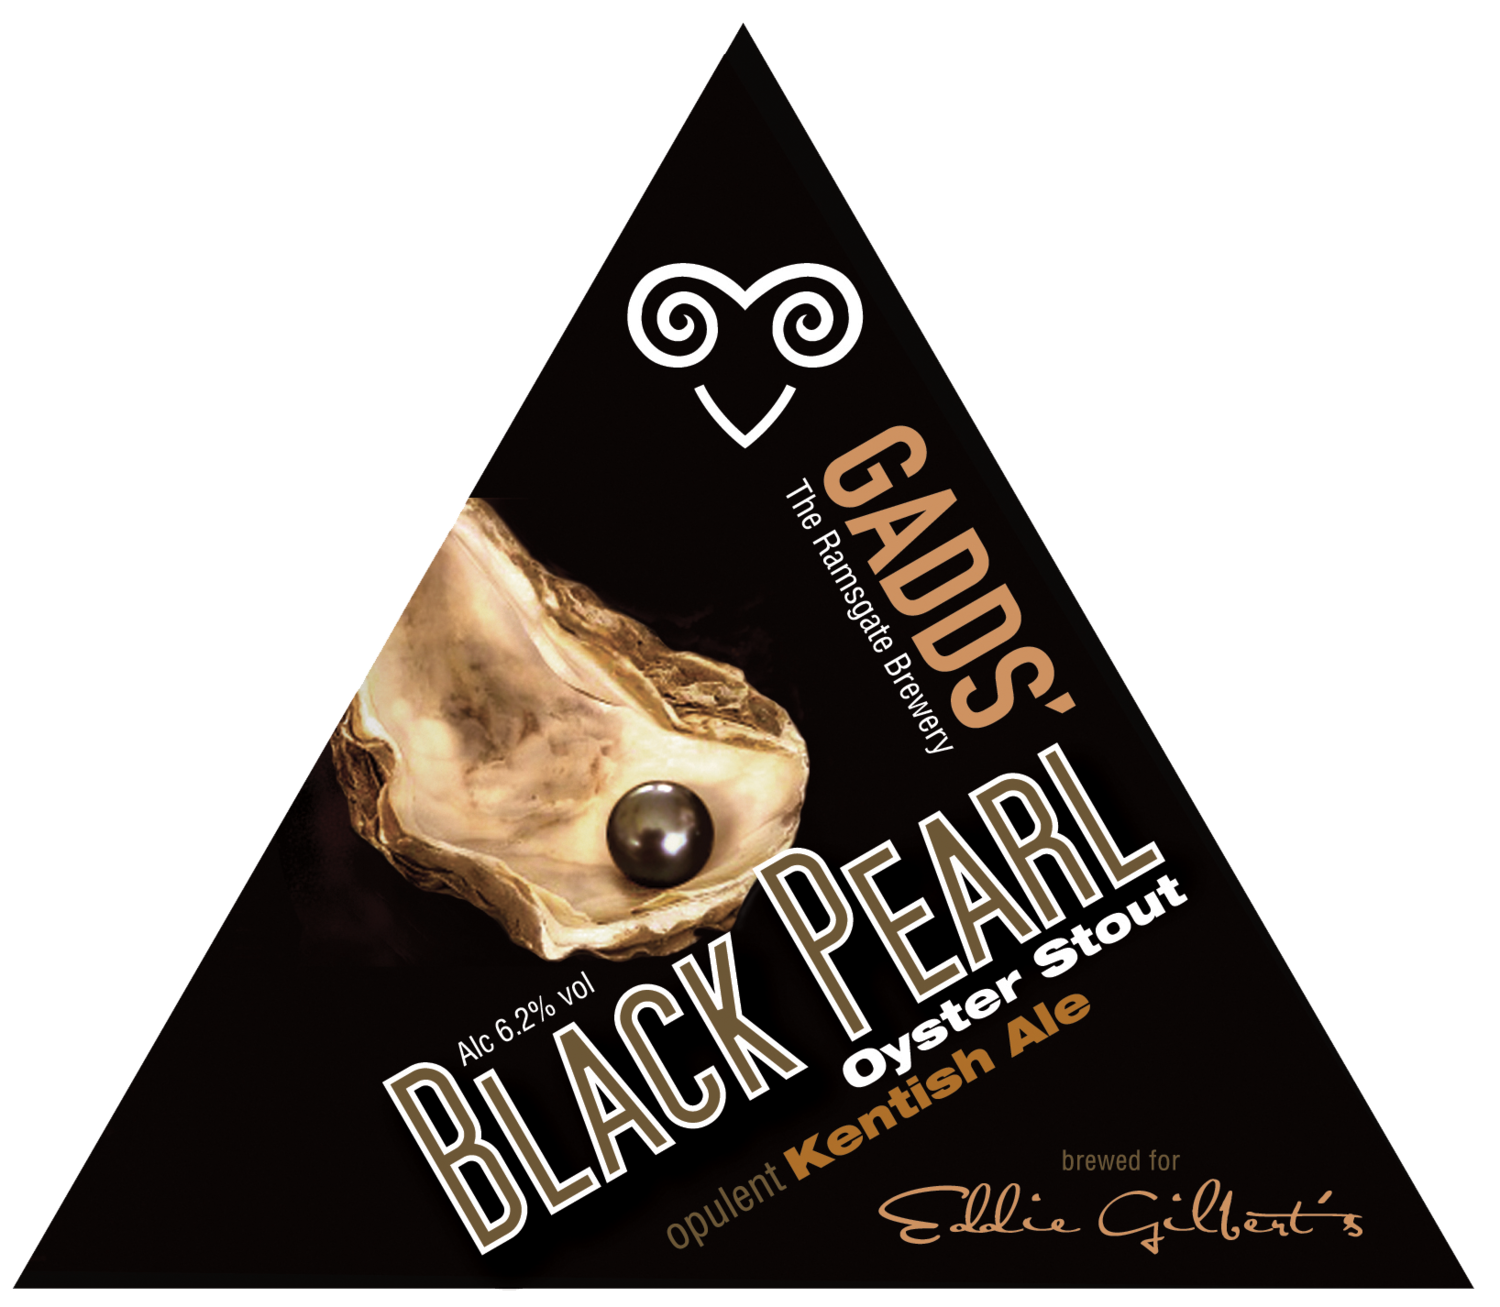 GADDS' Draught Black Pearl CASK 
Available in 4-pint bag